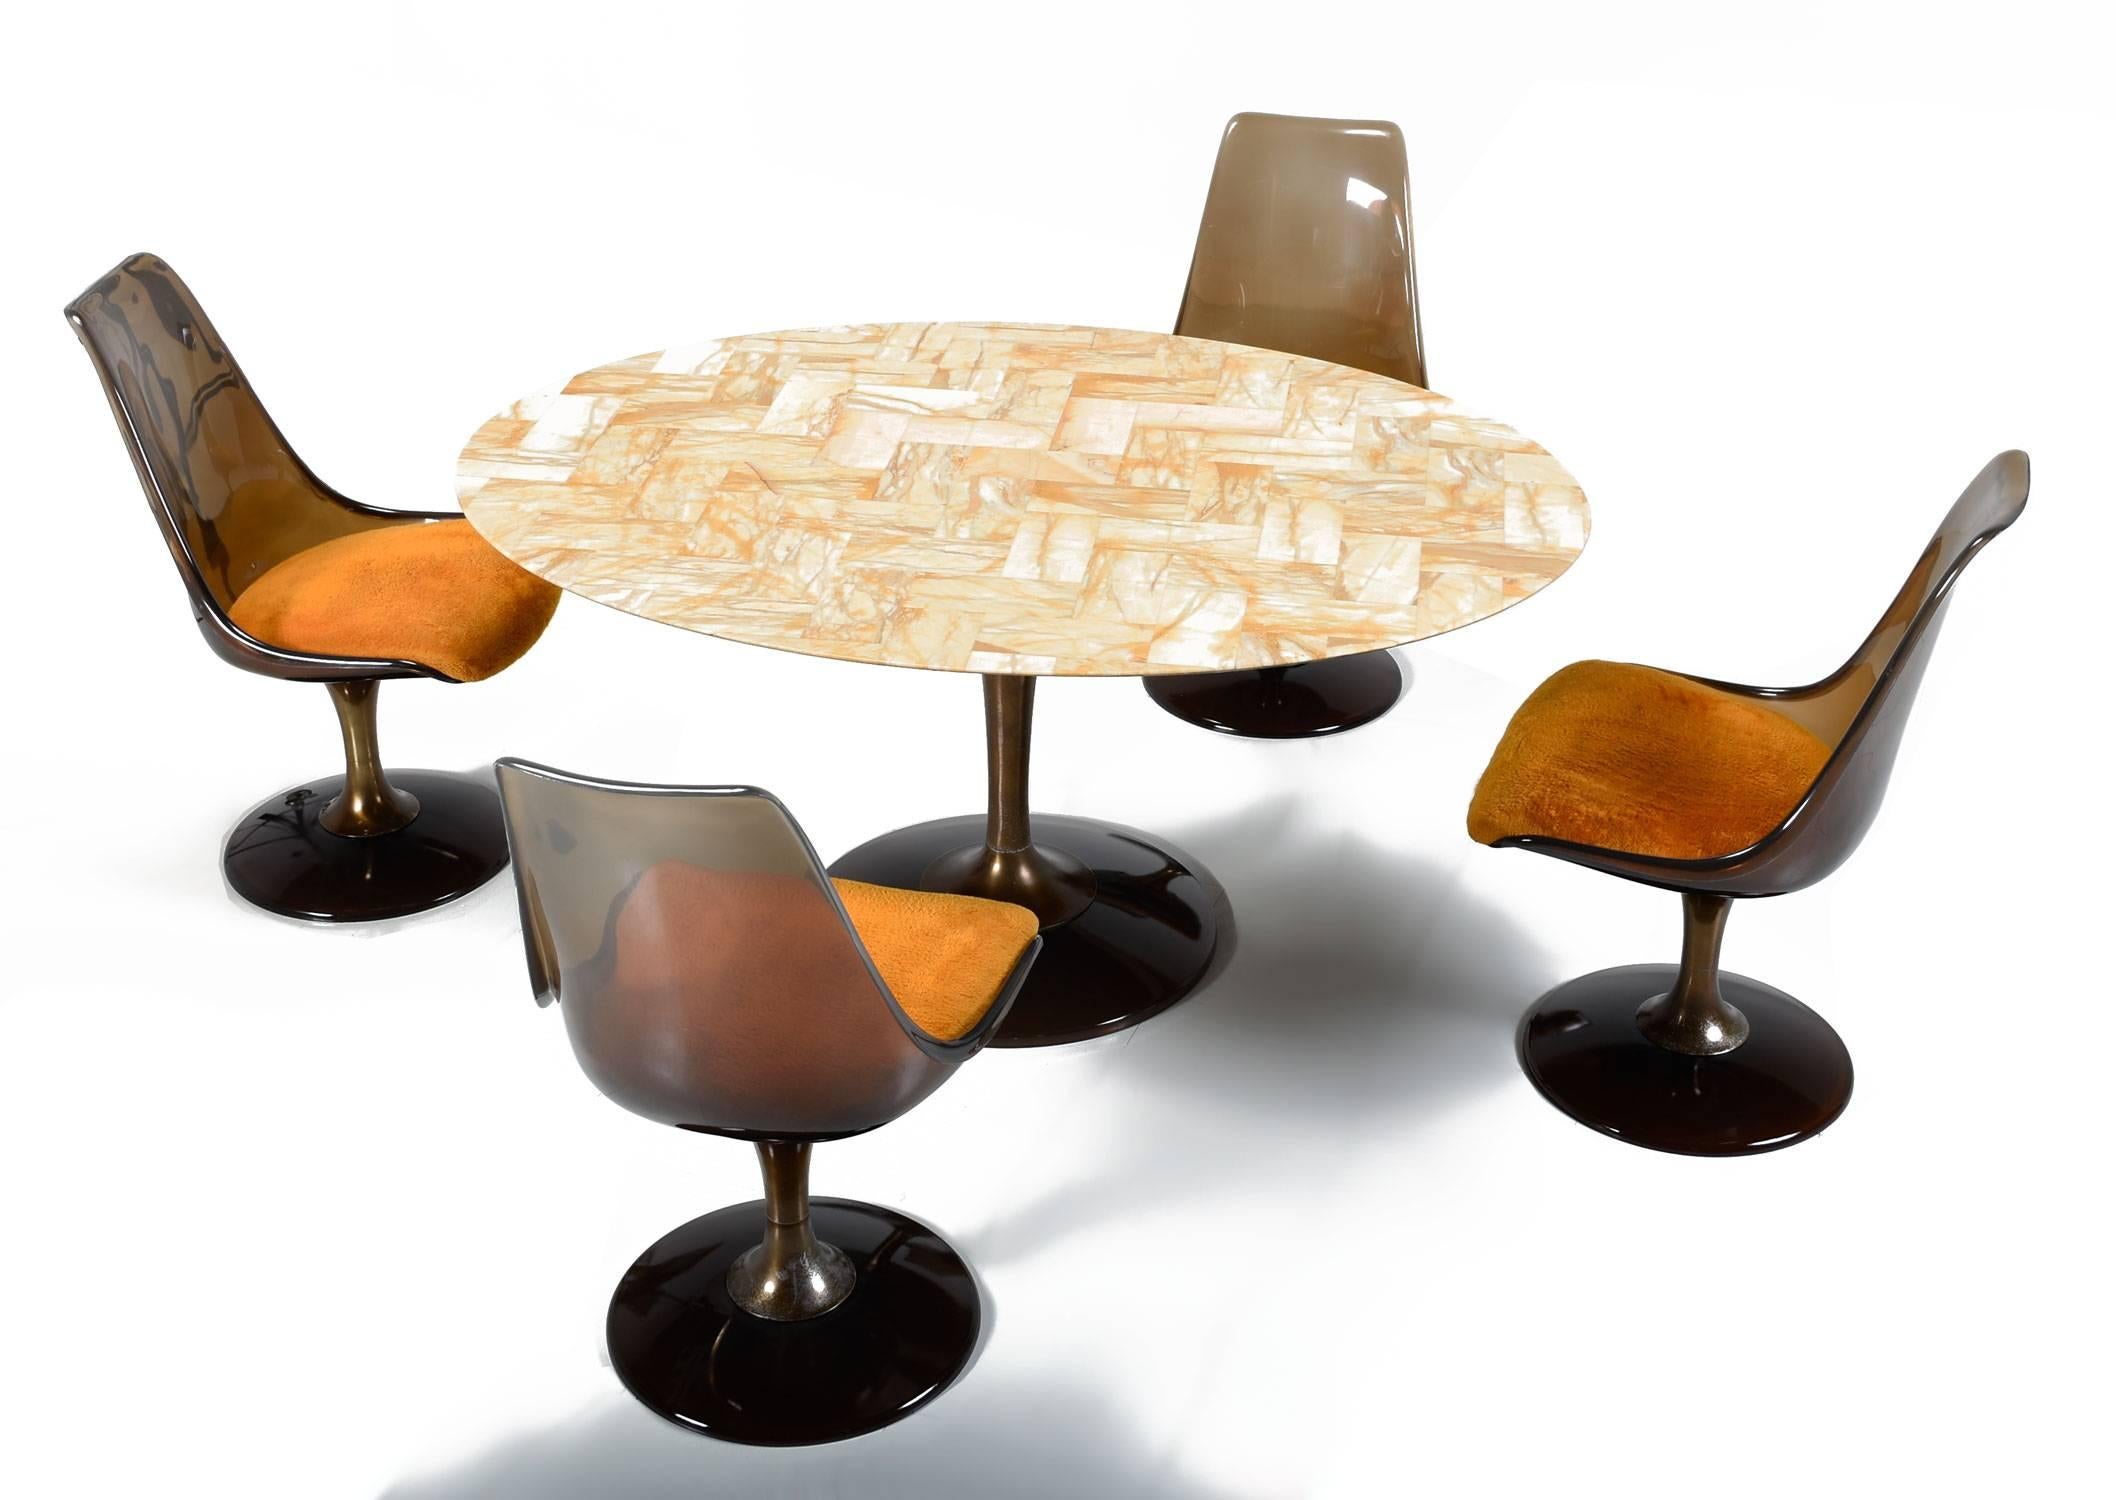 Super funky vintage 1970s, dining set by Chromcraft. The set comes with four Lucite chairs and oval dining table as pictured. The table is made of a resin that looks like a marbled stone. Each chair features the original fuzzy orange seat